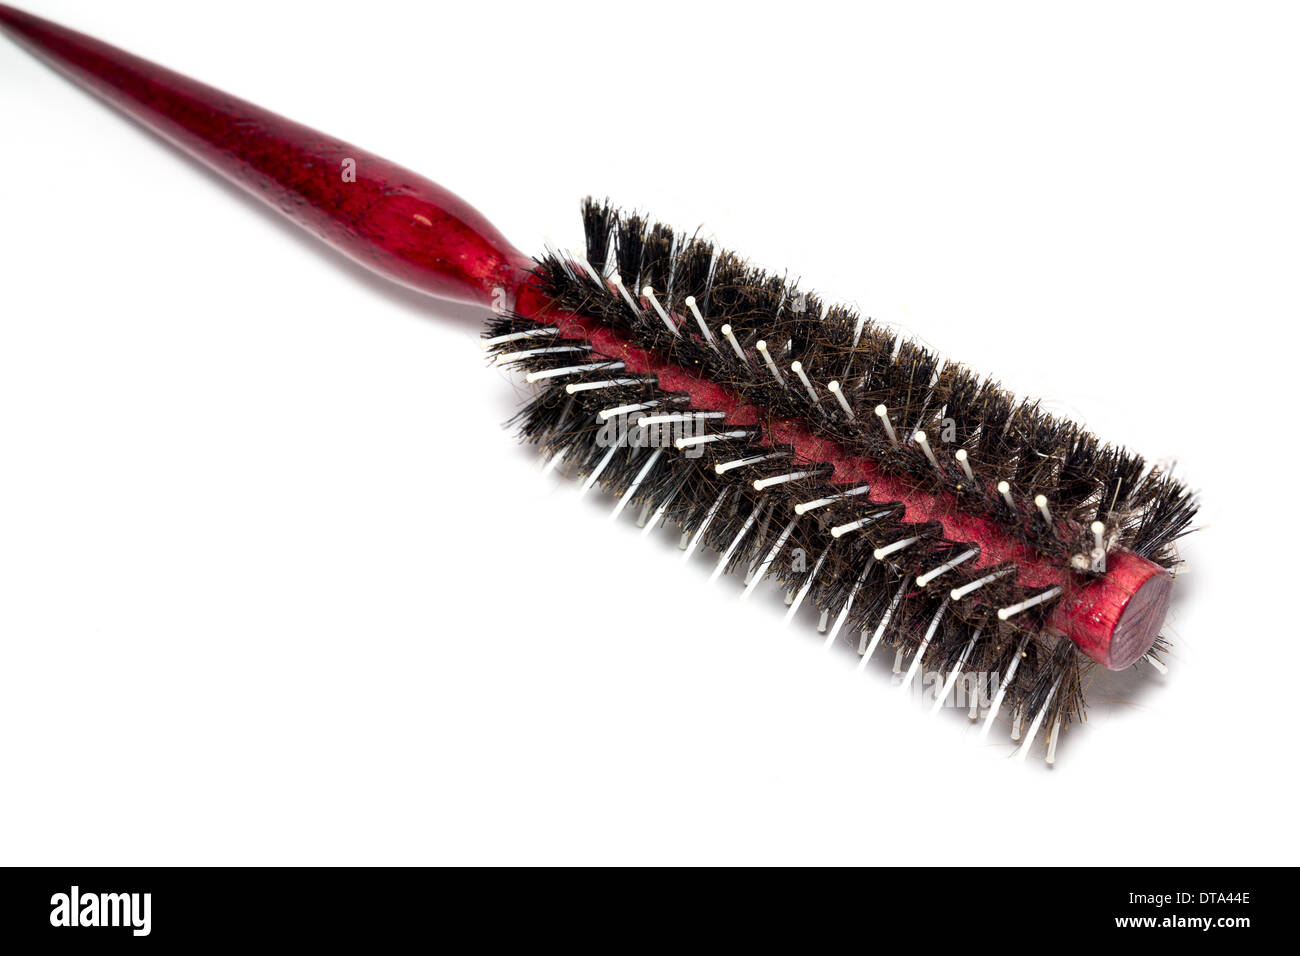 Hairbrush with Hair Loss on white background Stock Photo